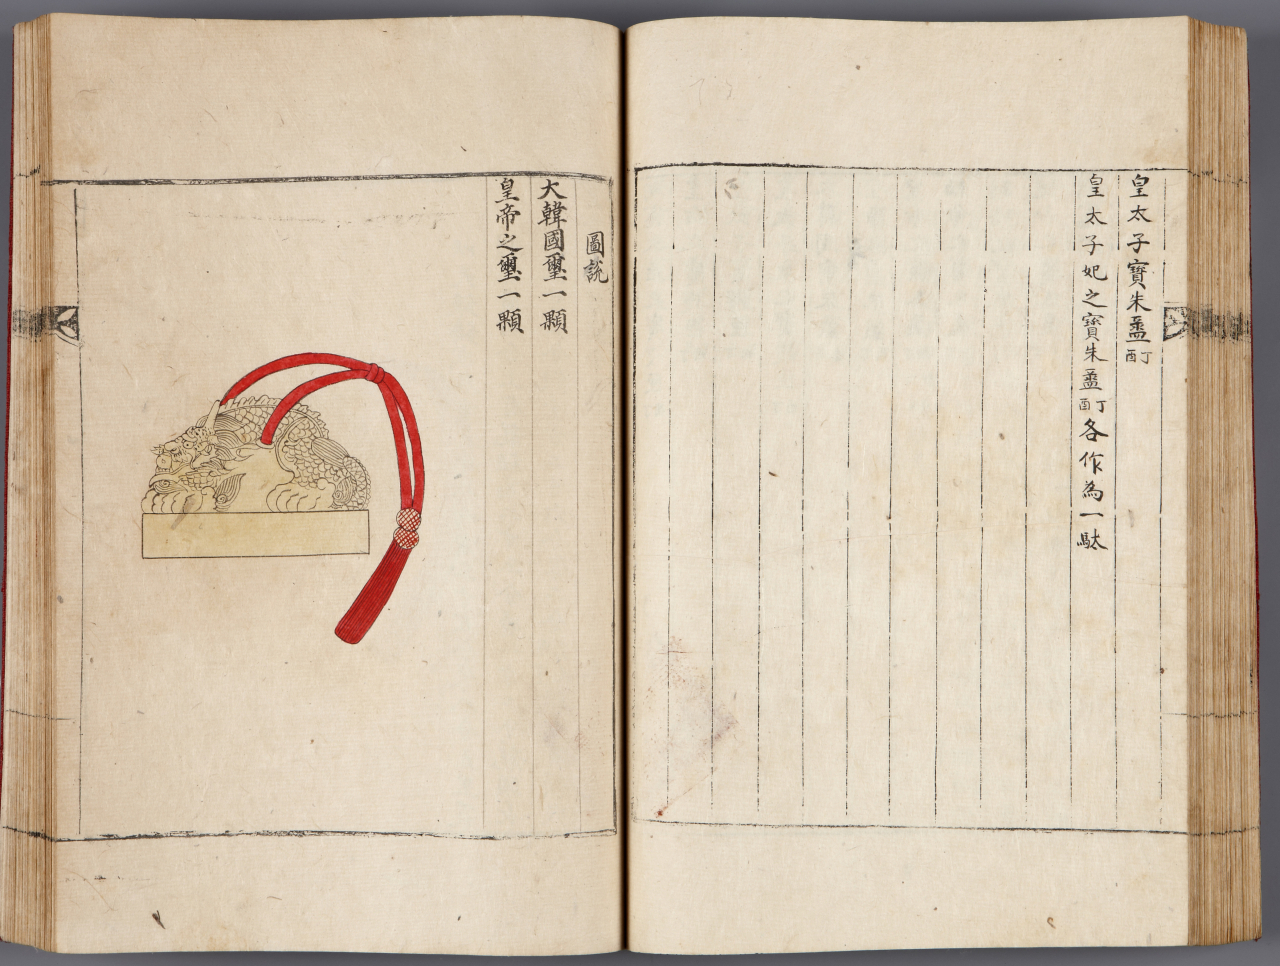 Royal protocol recording rites and procedures related to the proclamation of the Korean Empire in 1897, published in 1898, designated a Treasure (National Museum of the Annals of the Joseon Dynasty)